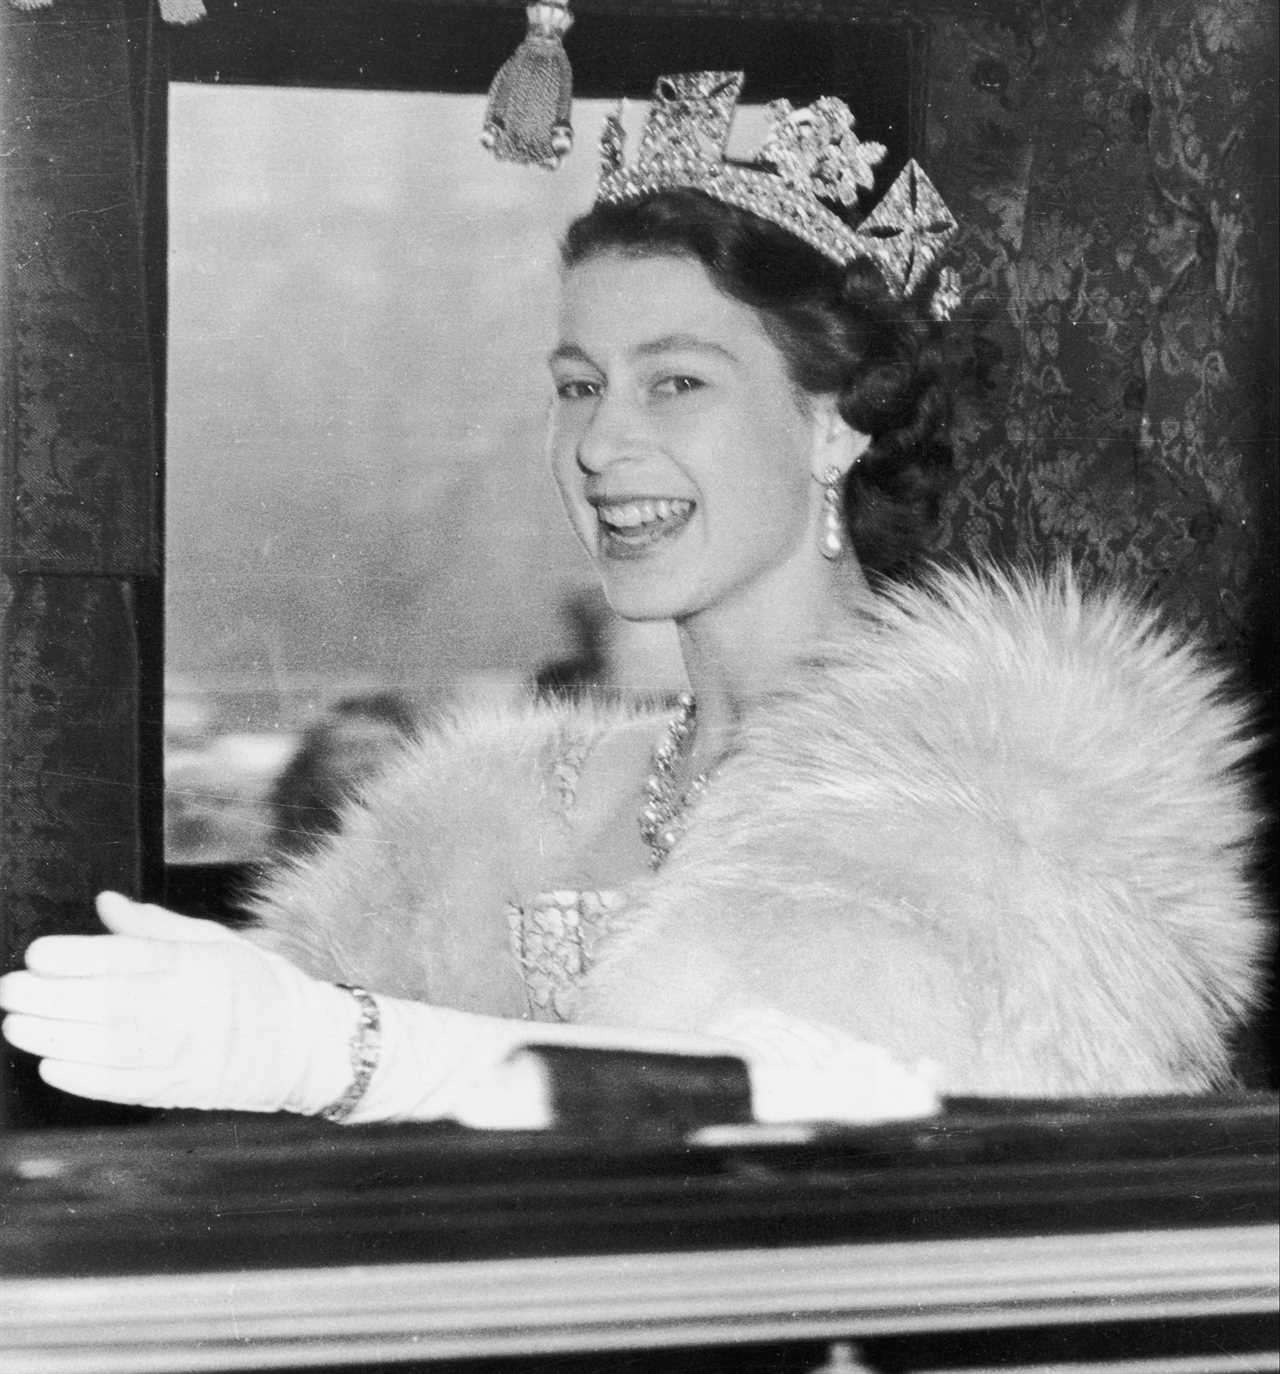 From Queen Elizabeth II to Dame Deborah James, Ray Liotta and Pele, all the stars we lost in 2022